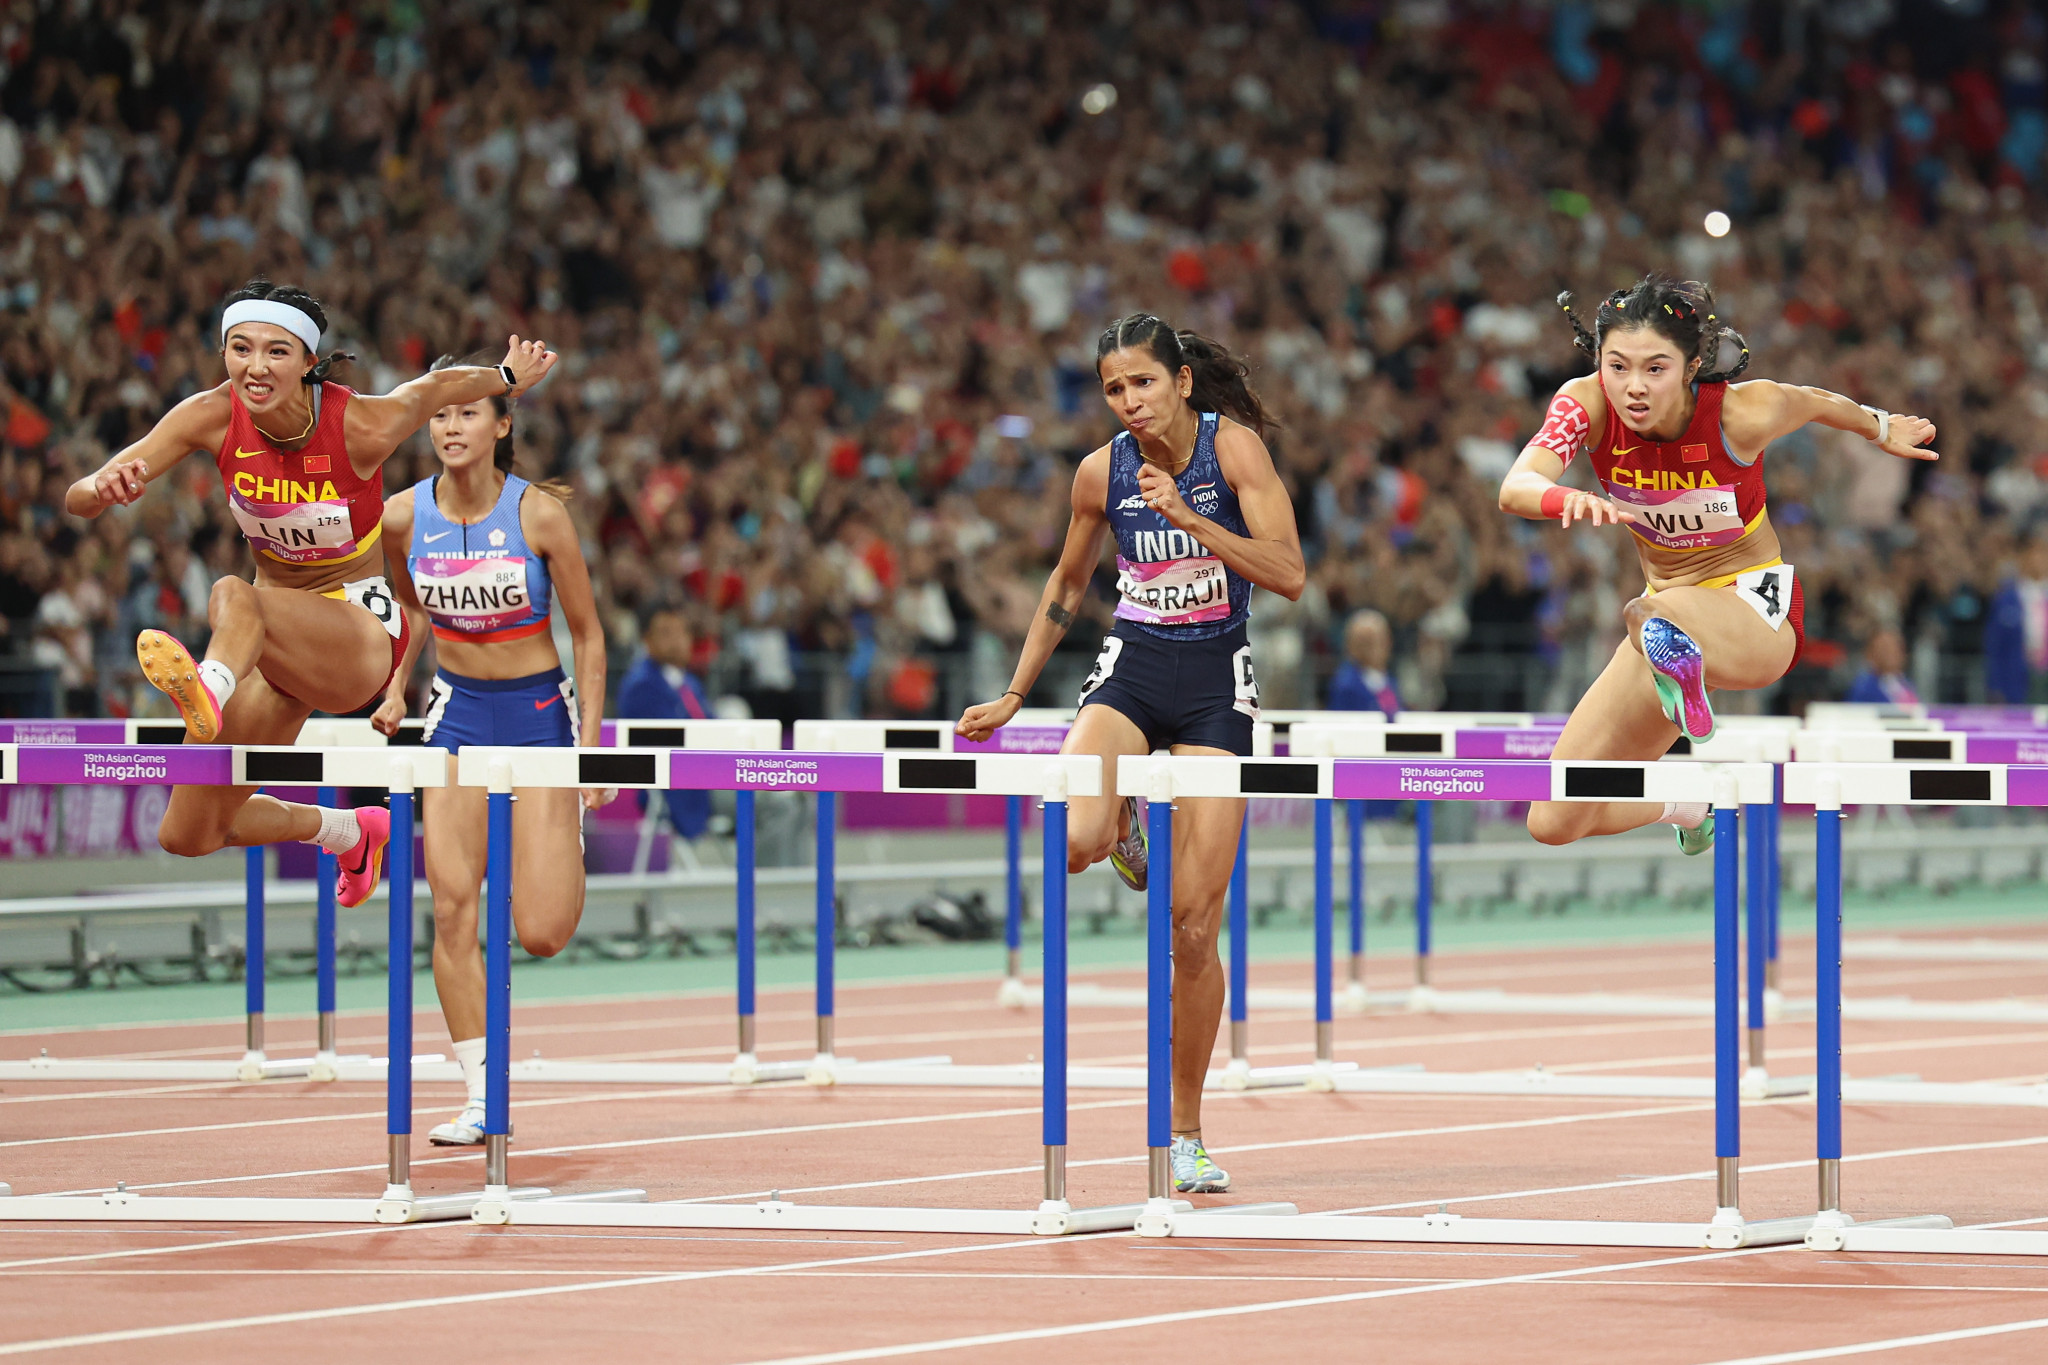 Wu Yanni, right, was allowed to run in the 100m despite committing a false start beforehand which should have resulted in an immediate disqualification ©Getty Images